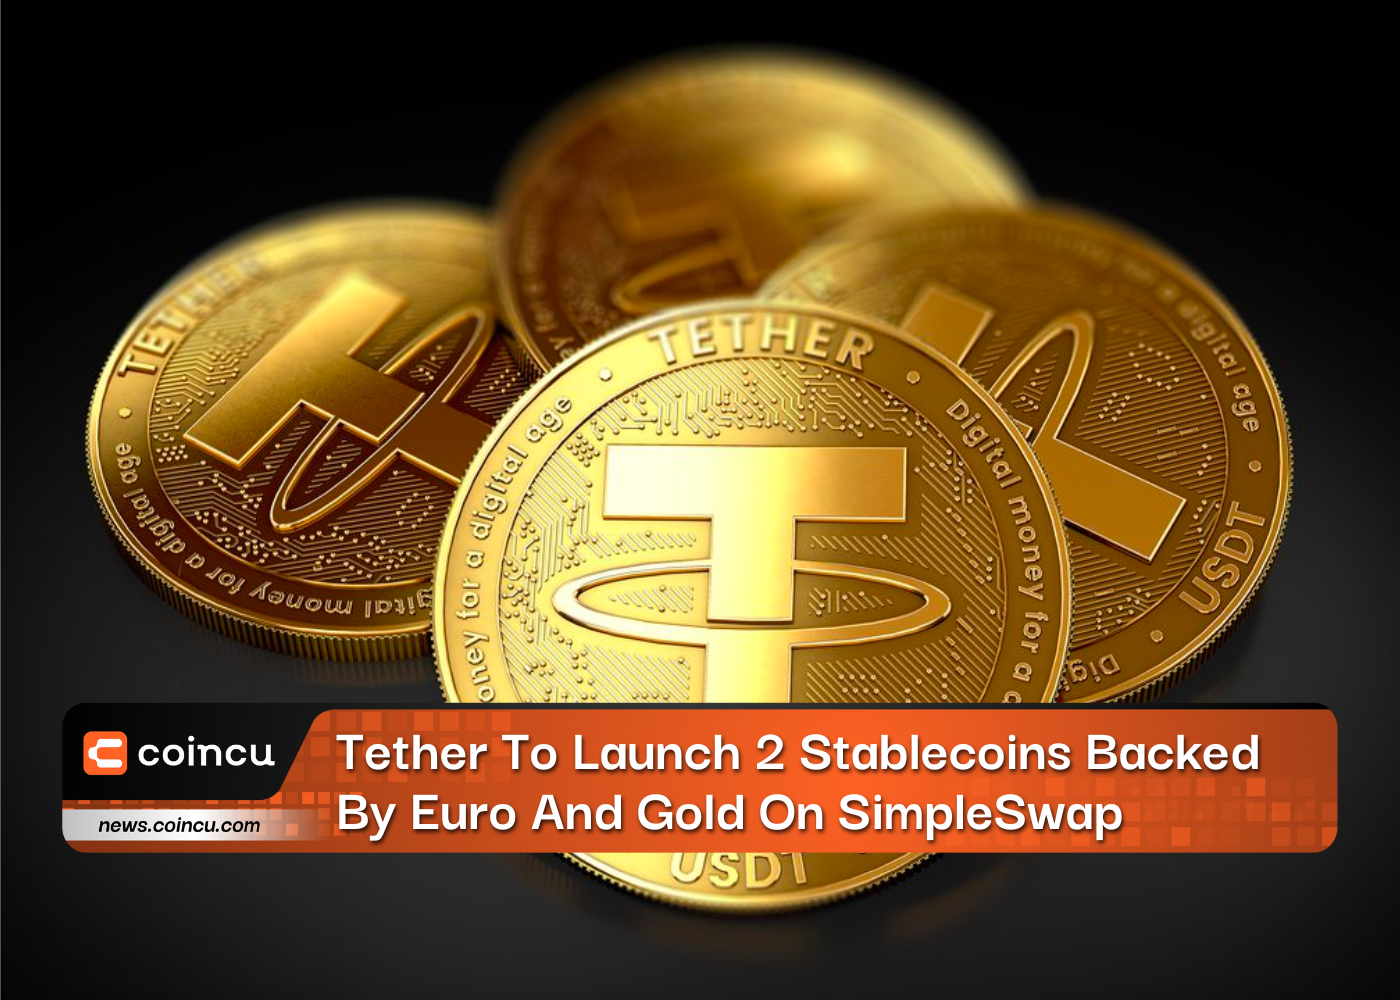 Tether To Launch 2 Stablecoins Backed By Euro And Gold On SimpleSwap